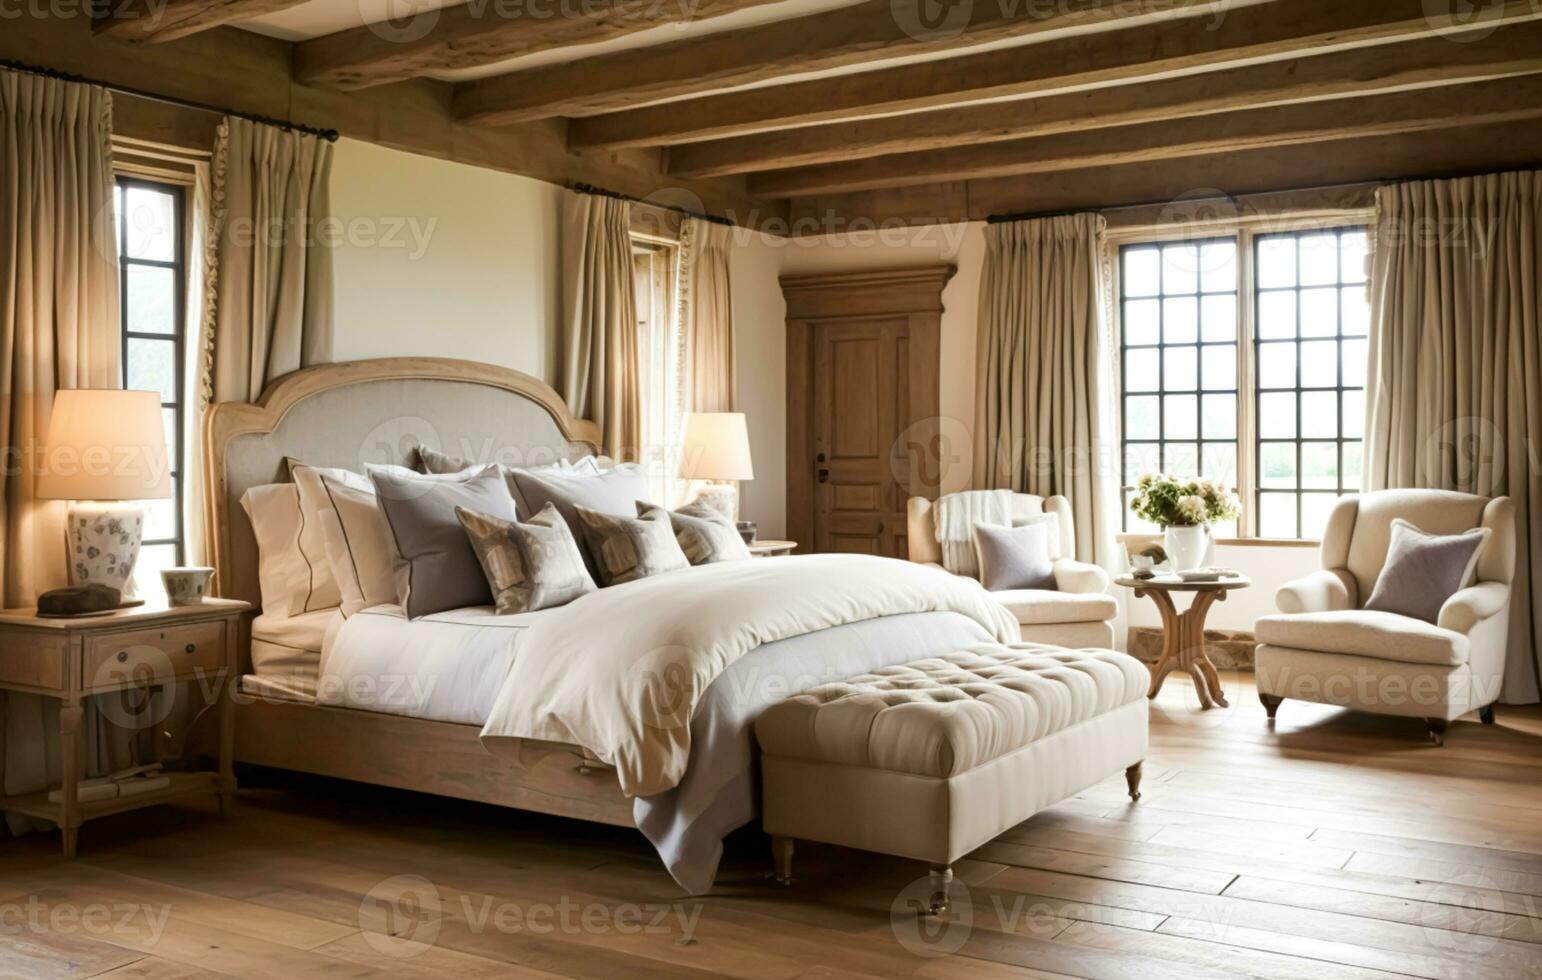 Bedroom decor, interior design and holiday rental, classic bed with elegant plush bedding and furniture, English country house and cottage style photo